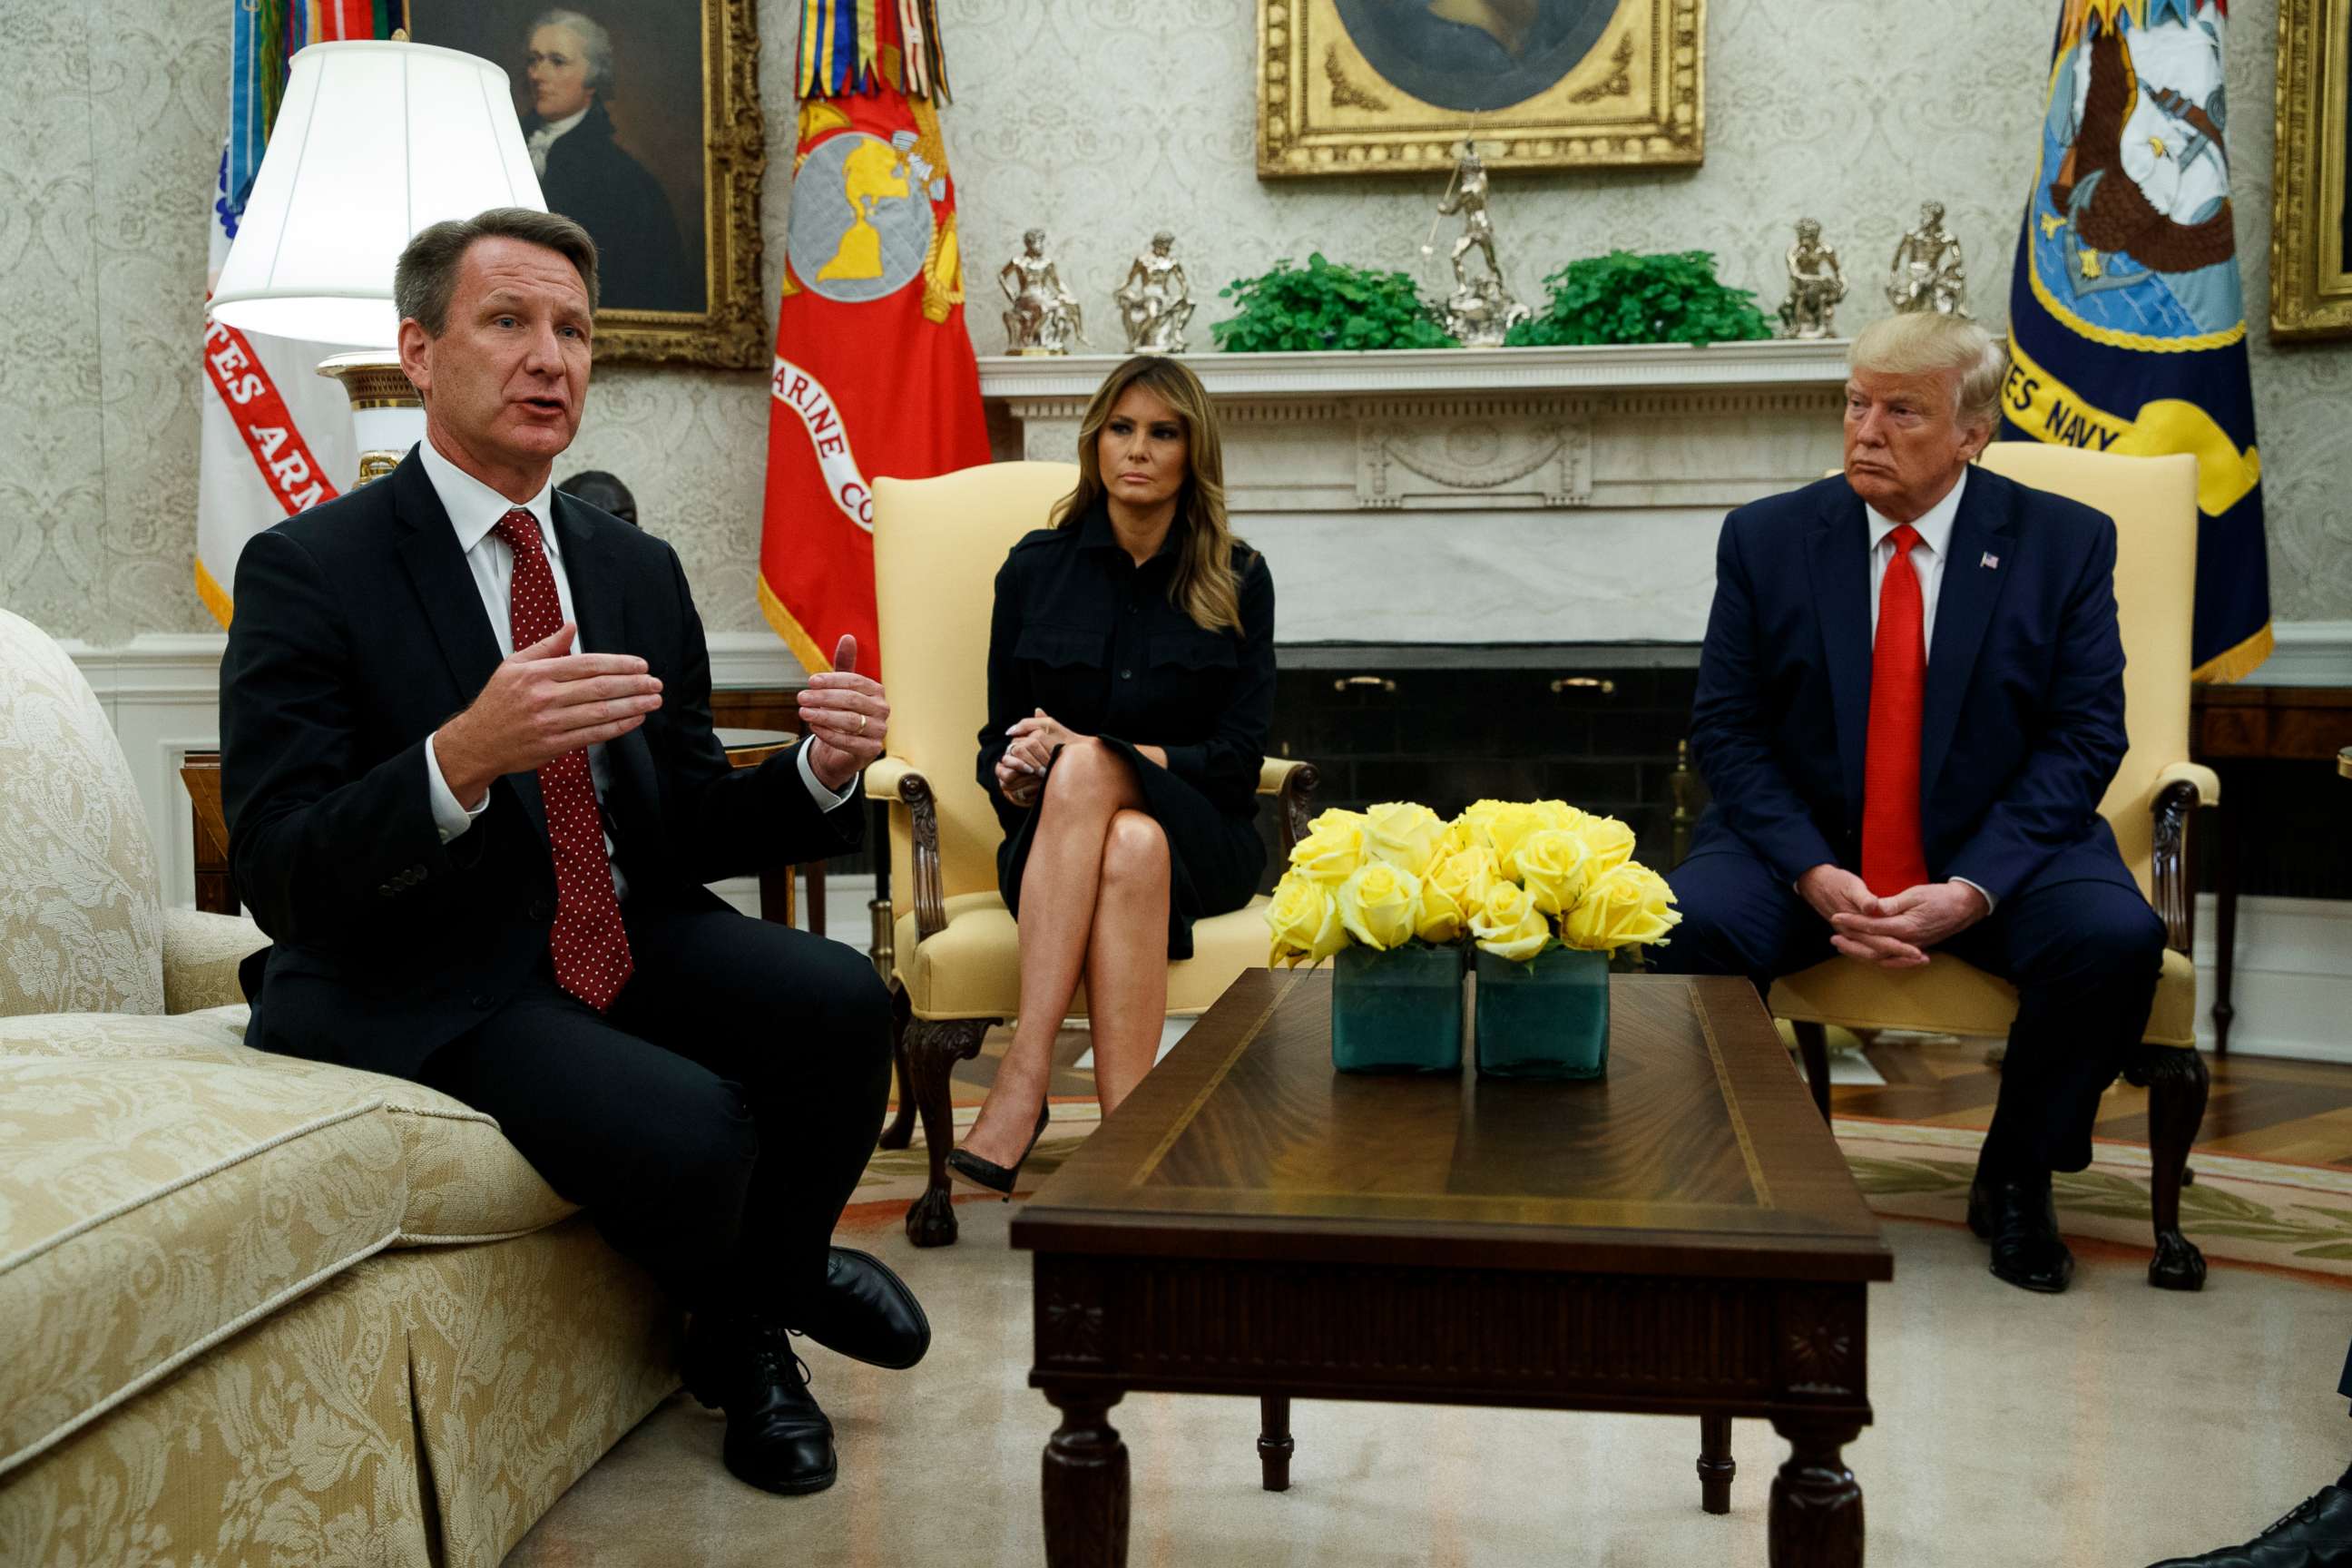 PHOTO: President Donald Trump and first lady Melania Trump listen as acting FDA Commissioner Ned Sharpless talks about a plan to ban most flavored e-cigarettes, in the Oval Office of the White House, Sept. 11, 2019, in Washington.